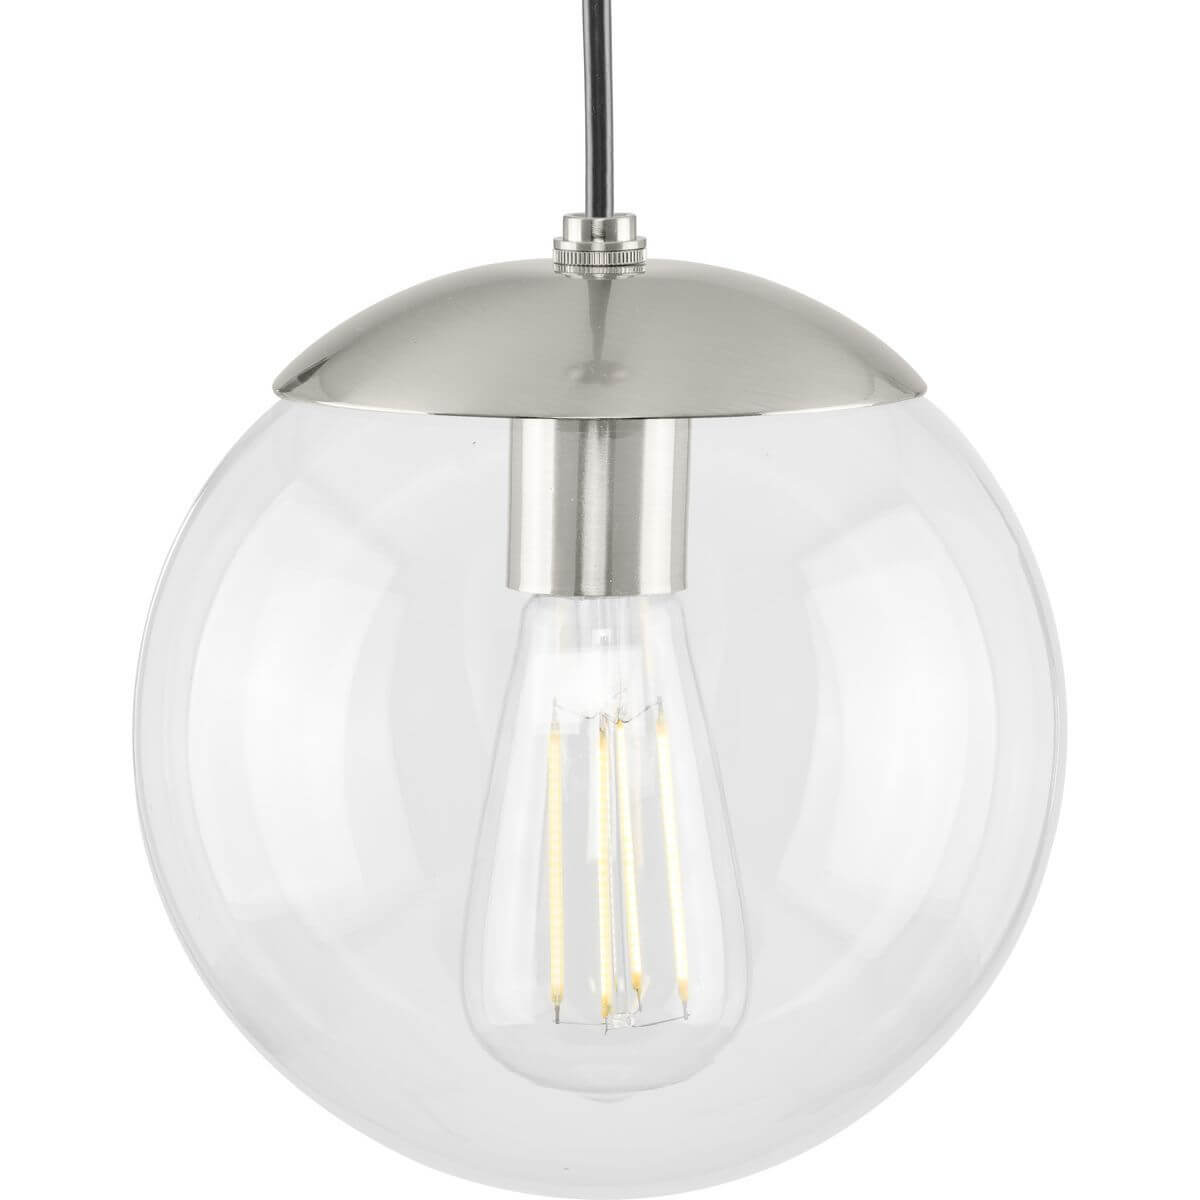 Progress Lighting Atwell 1 Light 8 inch Pendant in Brushed Nickel with Clear Glass P500309-009